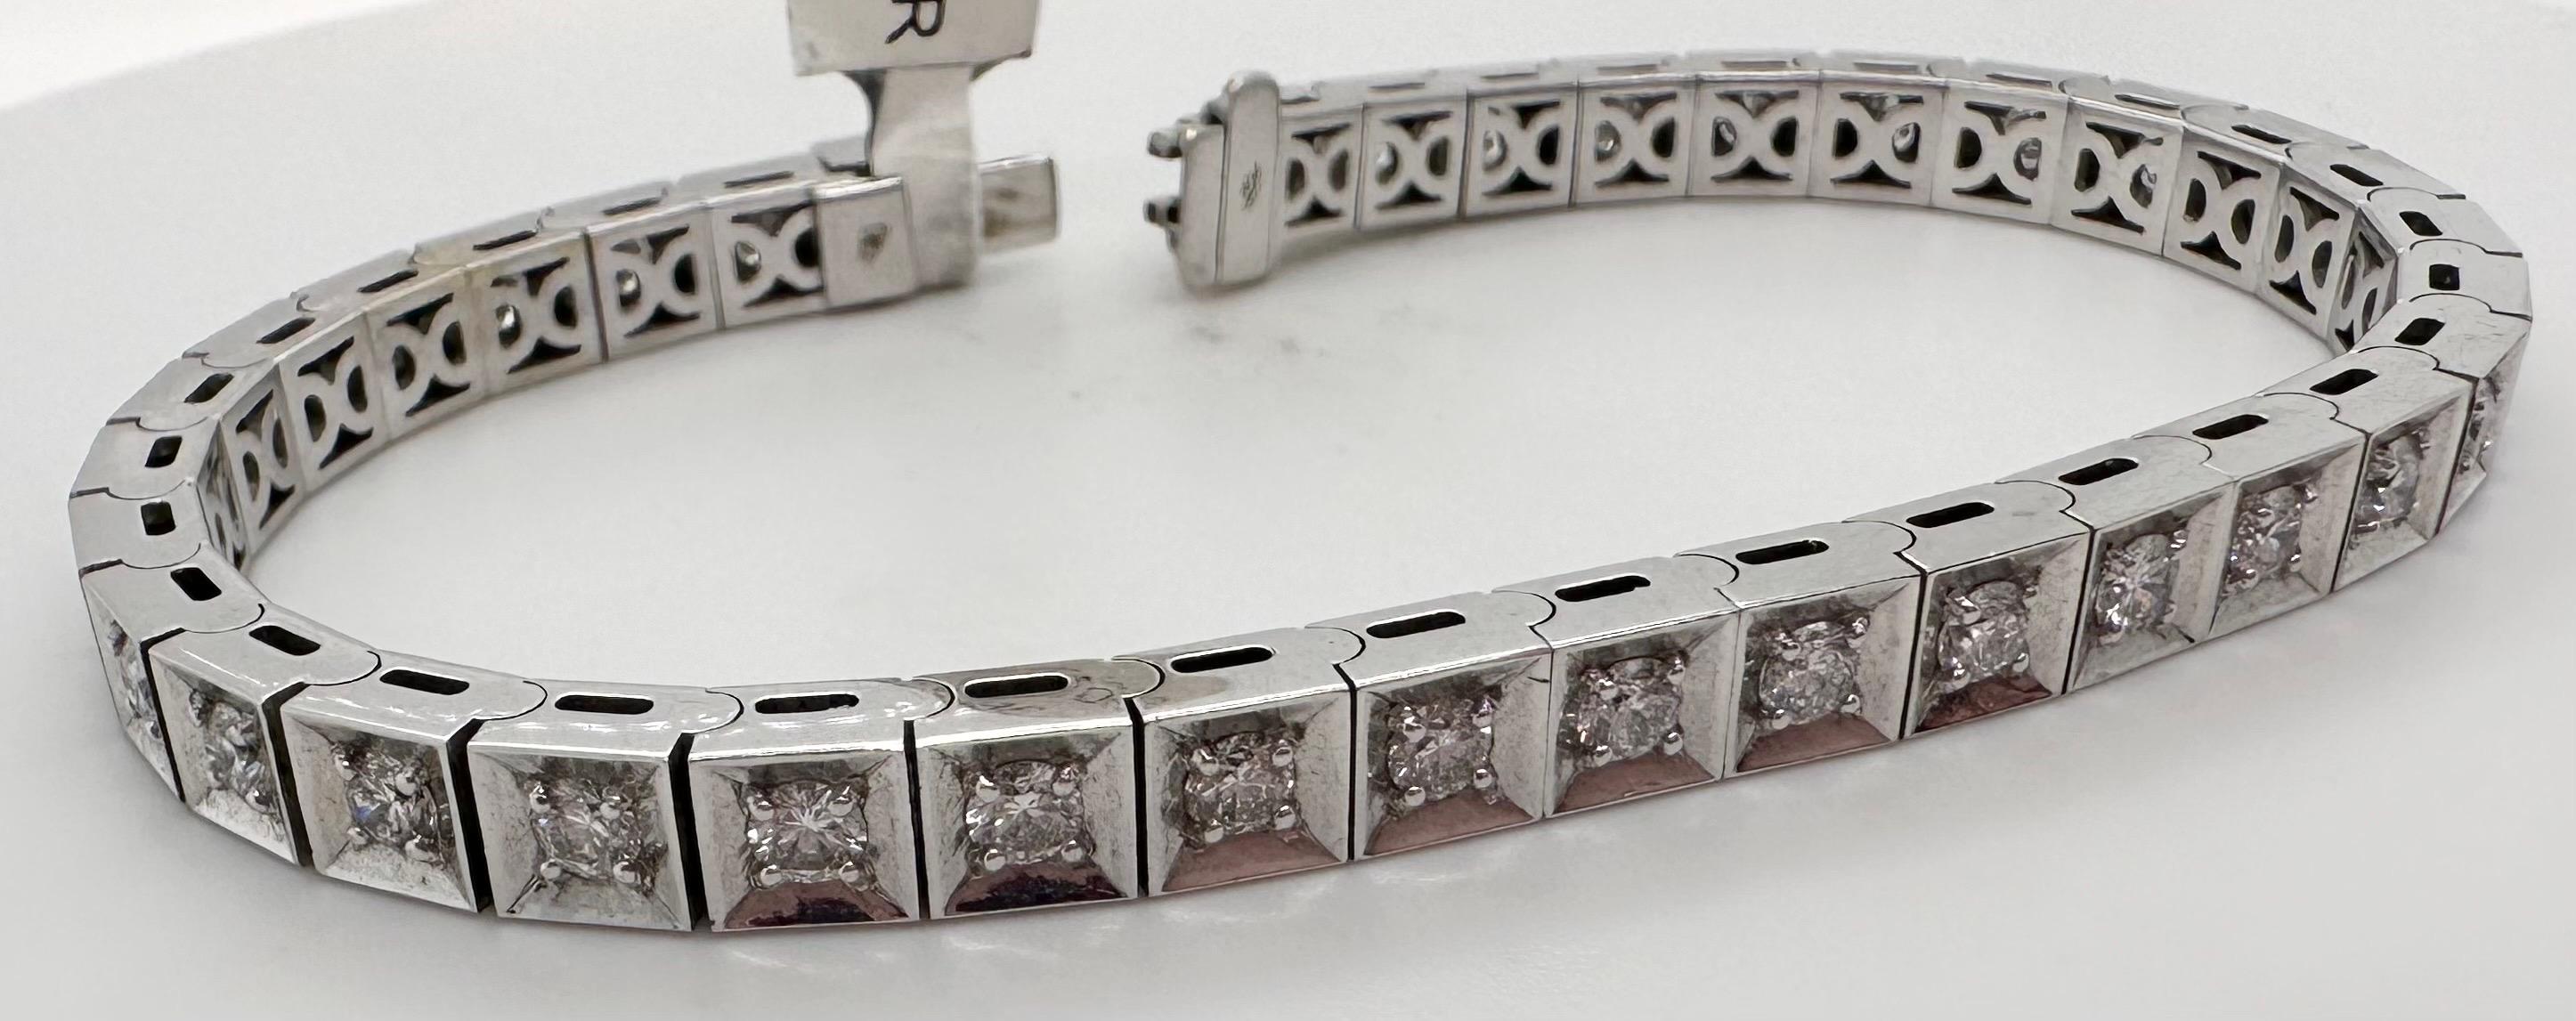 Tennis bracelet made with 3 carats of diamonds (VS-SI) and G-H color in 18KT white gold.
Certificate of authenticity comes with purchase!

ABOUT US
We are a family-owned business. Our studio in located in the heart of Boca Raton at the International